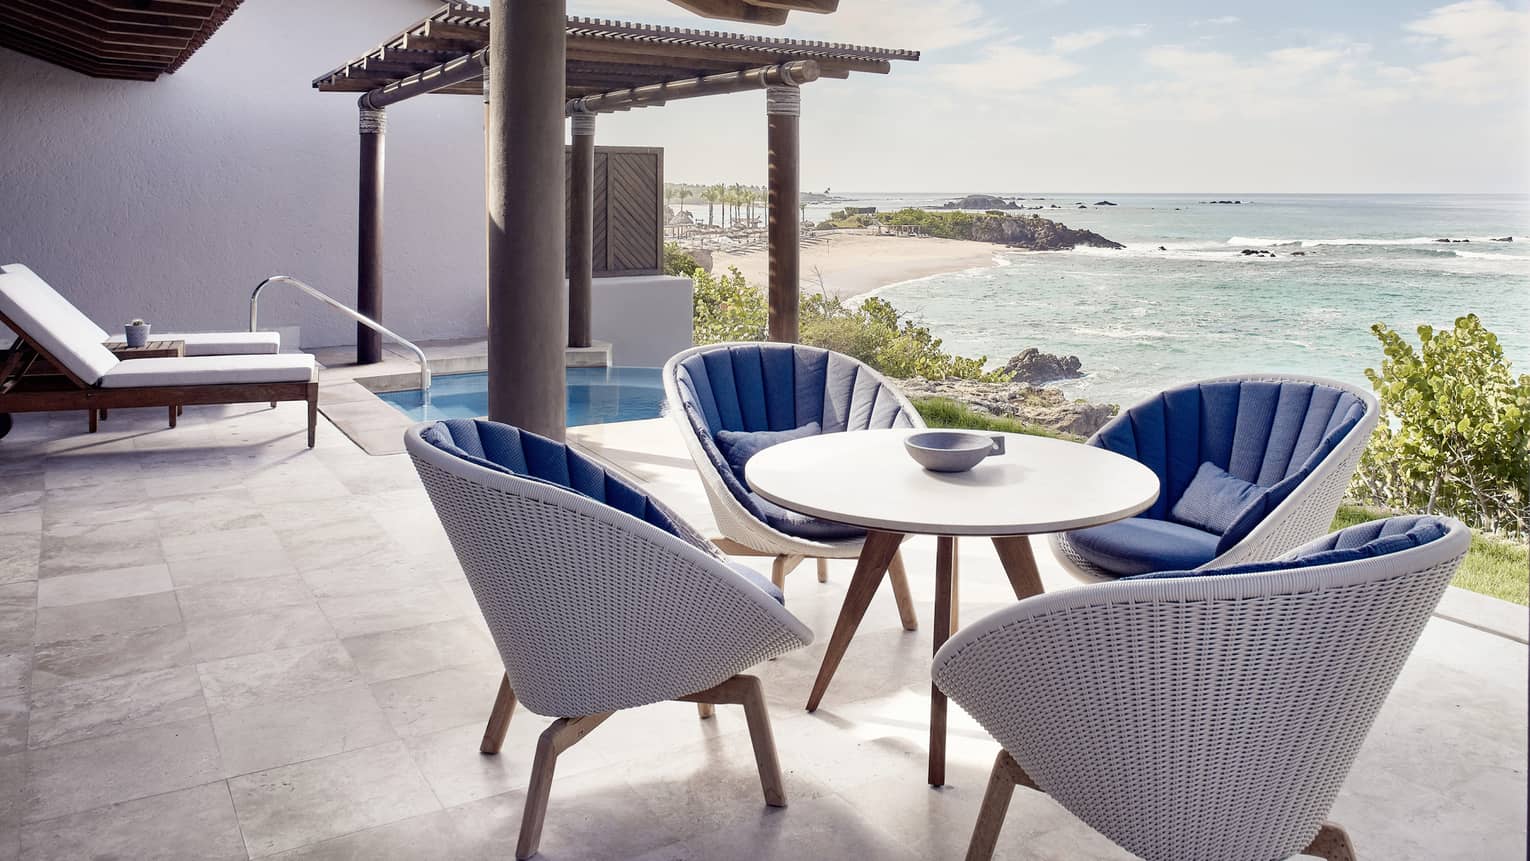 Outdoor terrace, dining table with four wicker chairs, plunge pool, ocean view